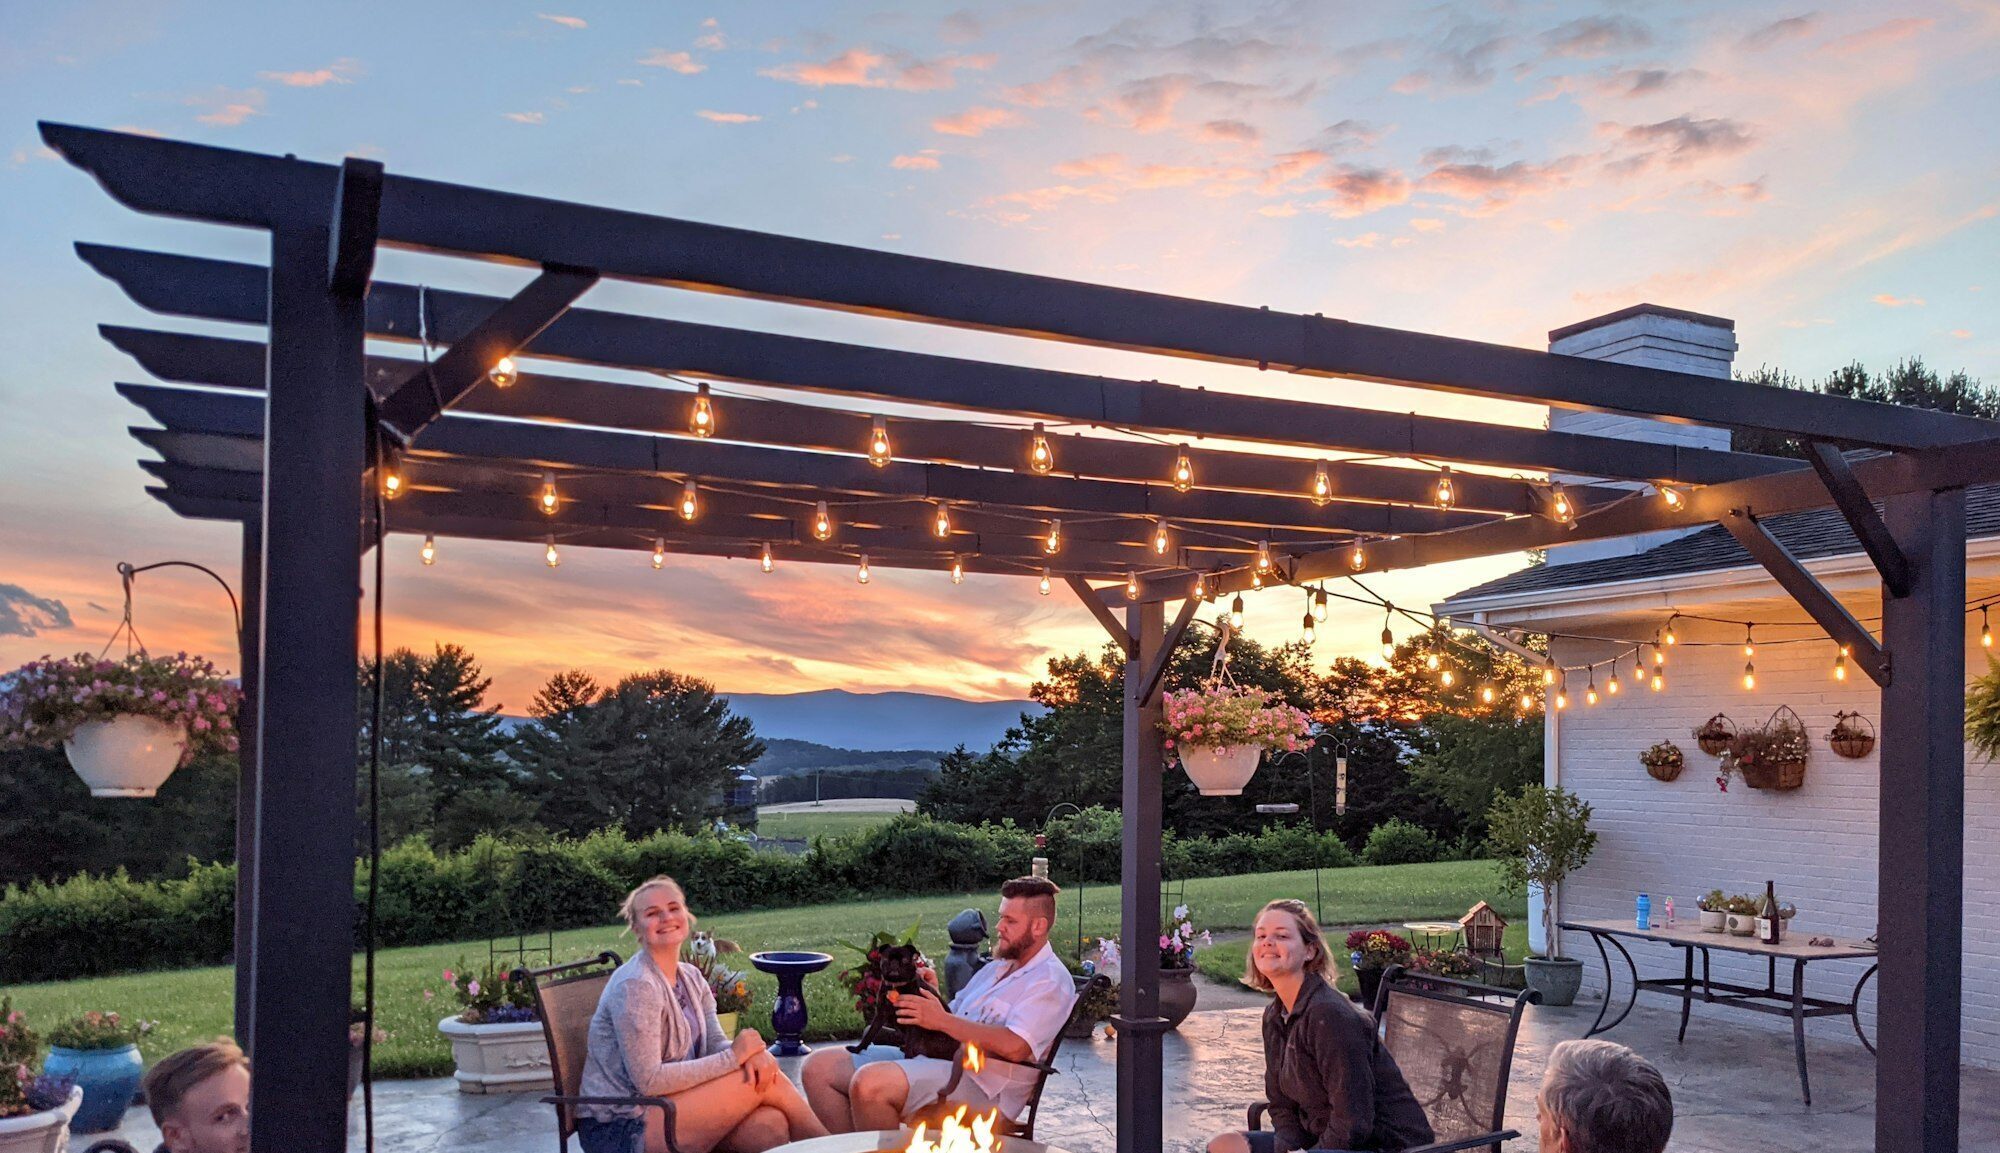 A family relaxing around a fire table in outdoor seating area under pergola with lights at sunset